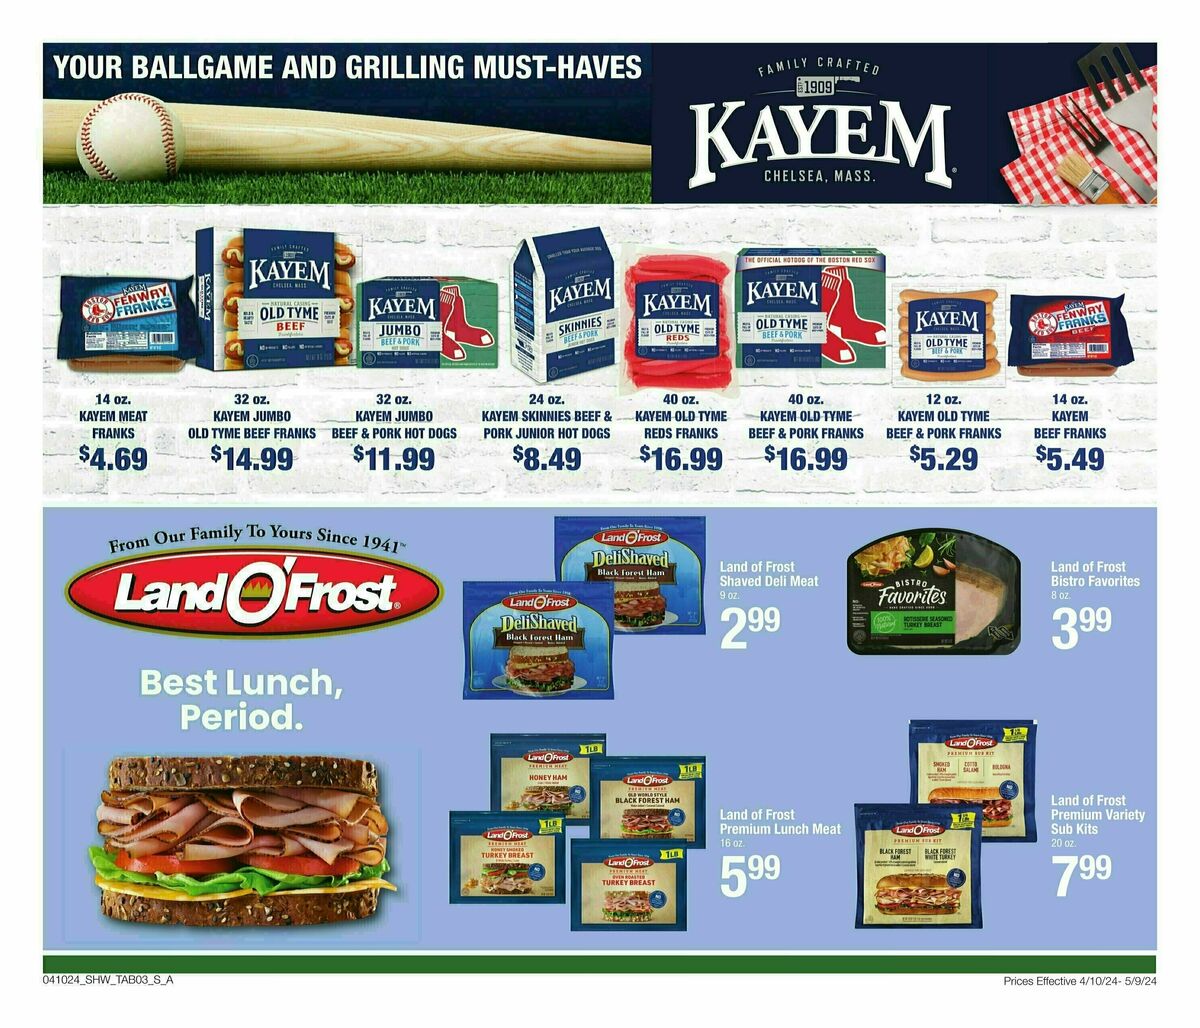 Shaw's Big Book of Savings Weekly Ad from April 10